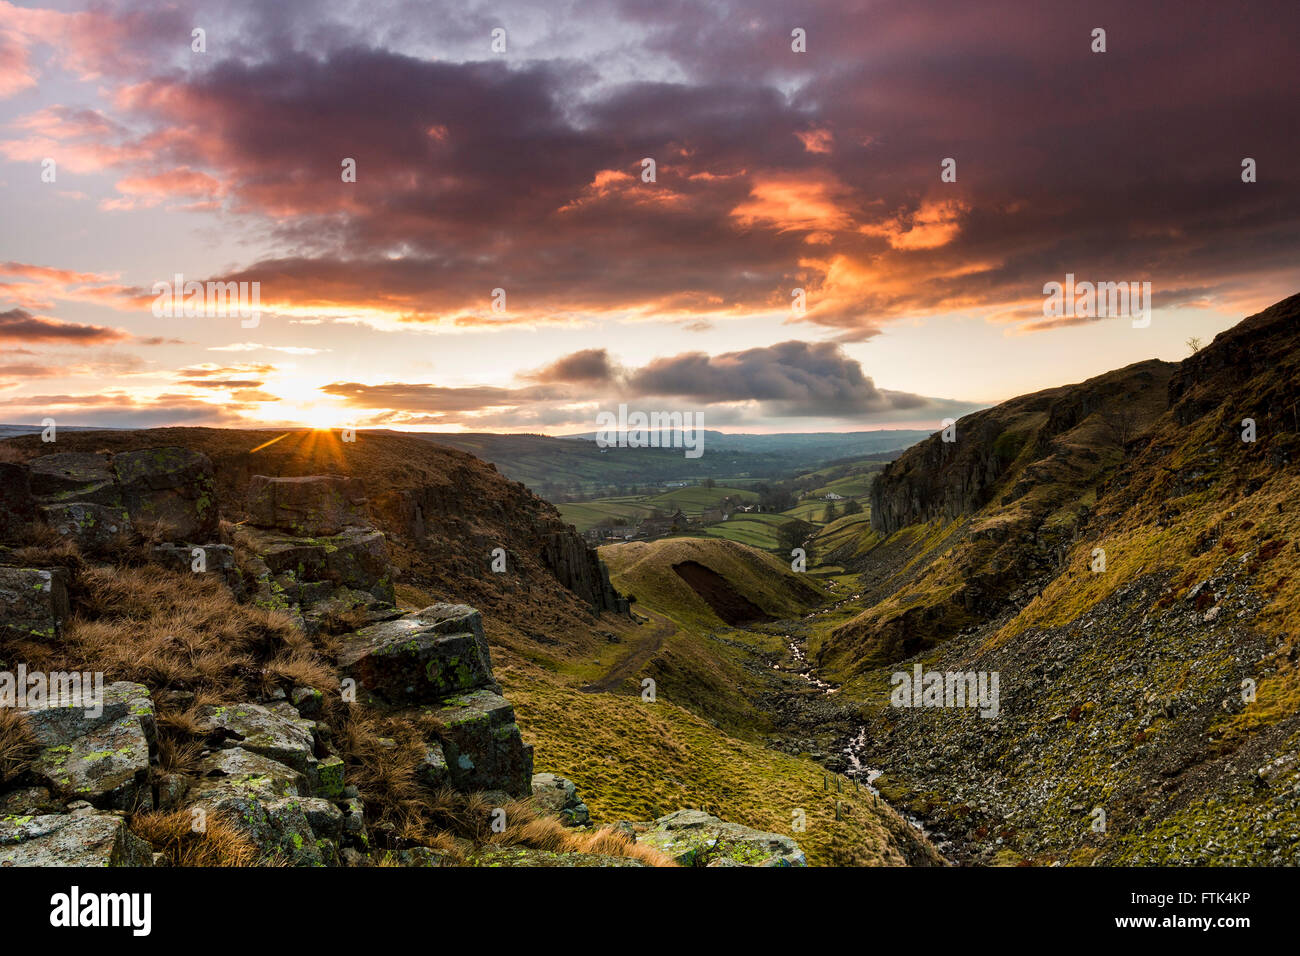 Holwick, Teesdale, County Durham UK.  Wednesday 30th March 2016. UK Weather.  Heavy overnight showers gave way to a colourful sunrise this morning. A day of sunny spells and showers is forecast at low levels, while at higher levels these may be of hail and snow, with thunder possible in the heaviest. Credit:  David Forster/Alamy Live News Stock Photo